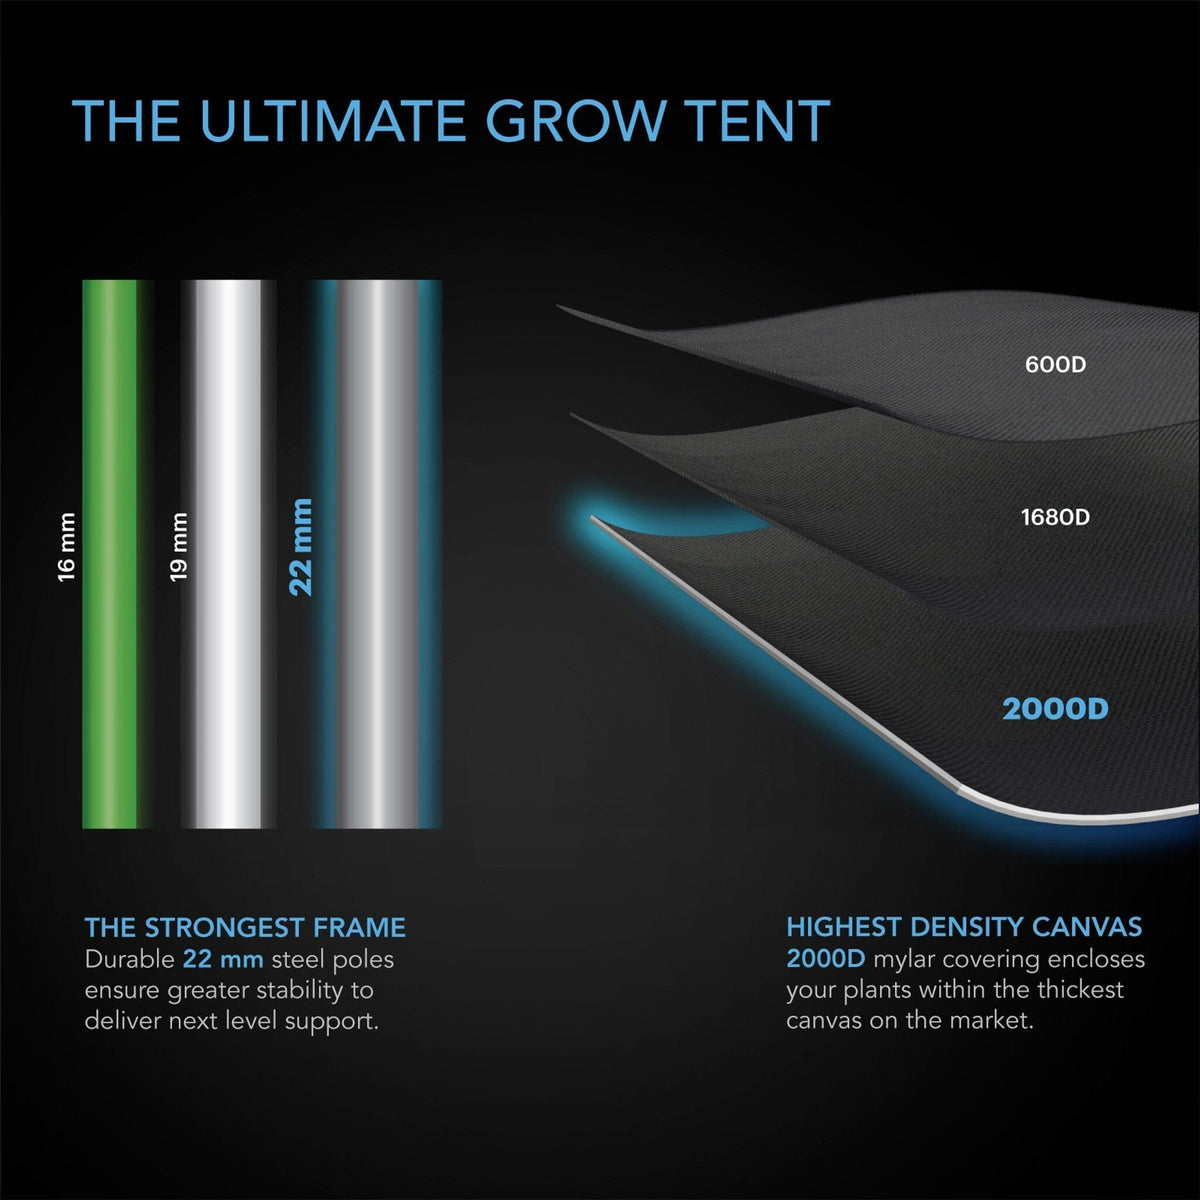 The Ultimate grow tent